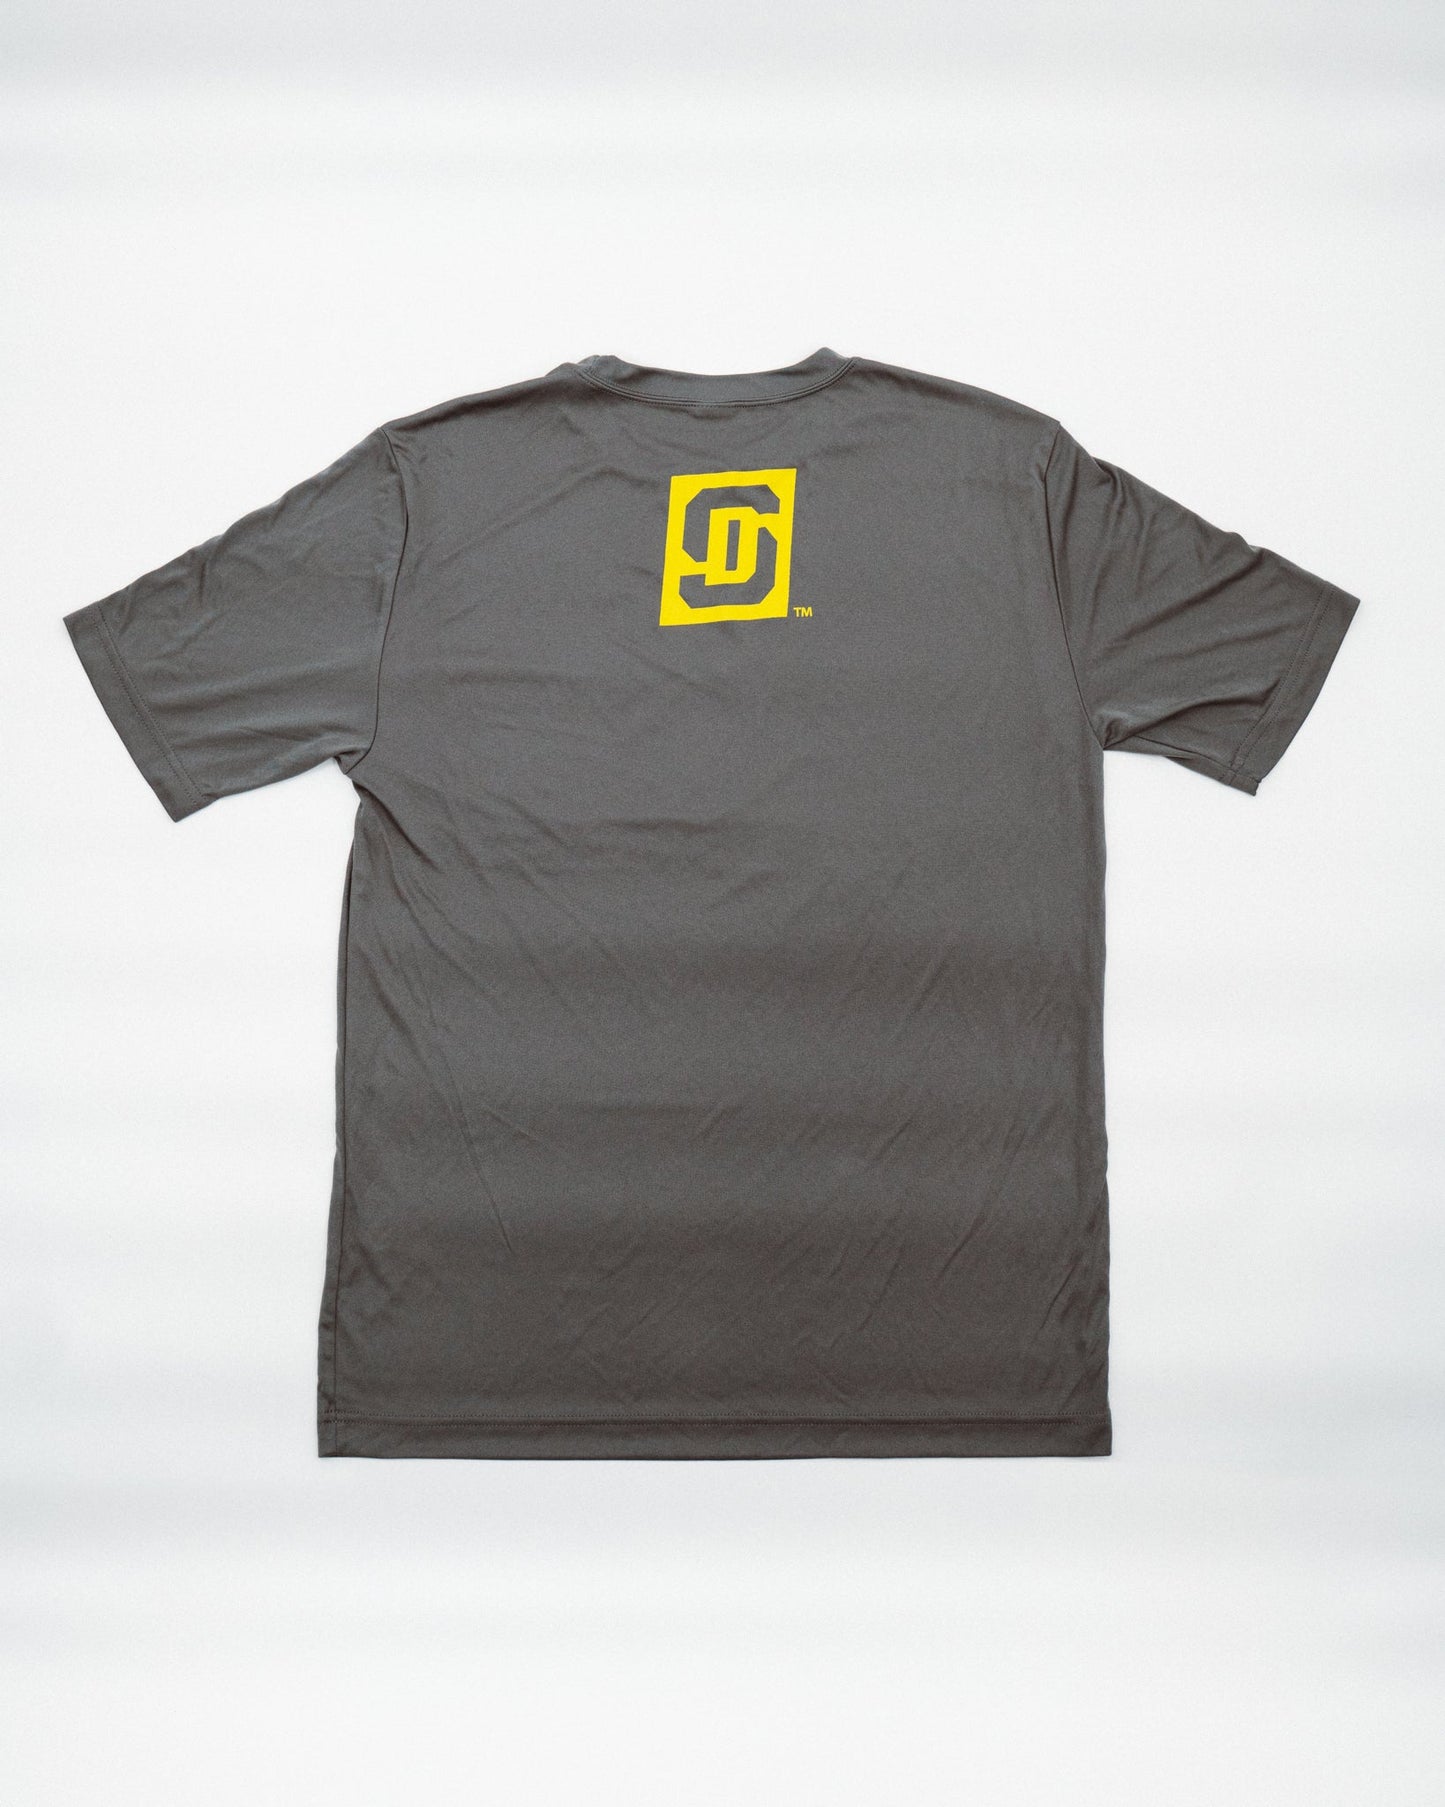 Combine Exclusive Dri Fit T-Shirt - Signing Day Sports